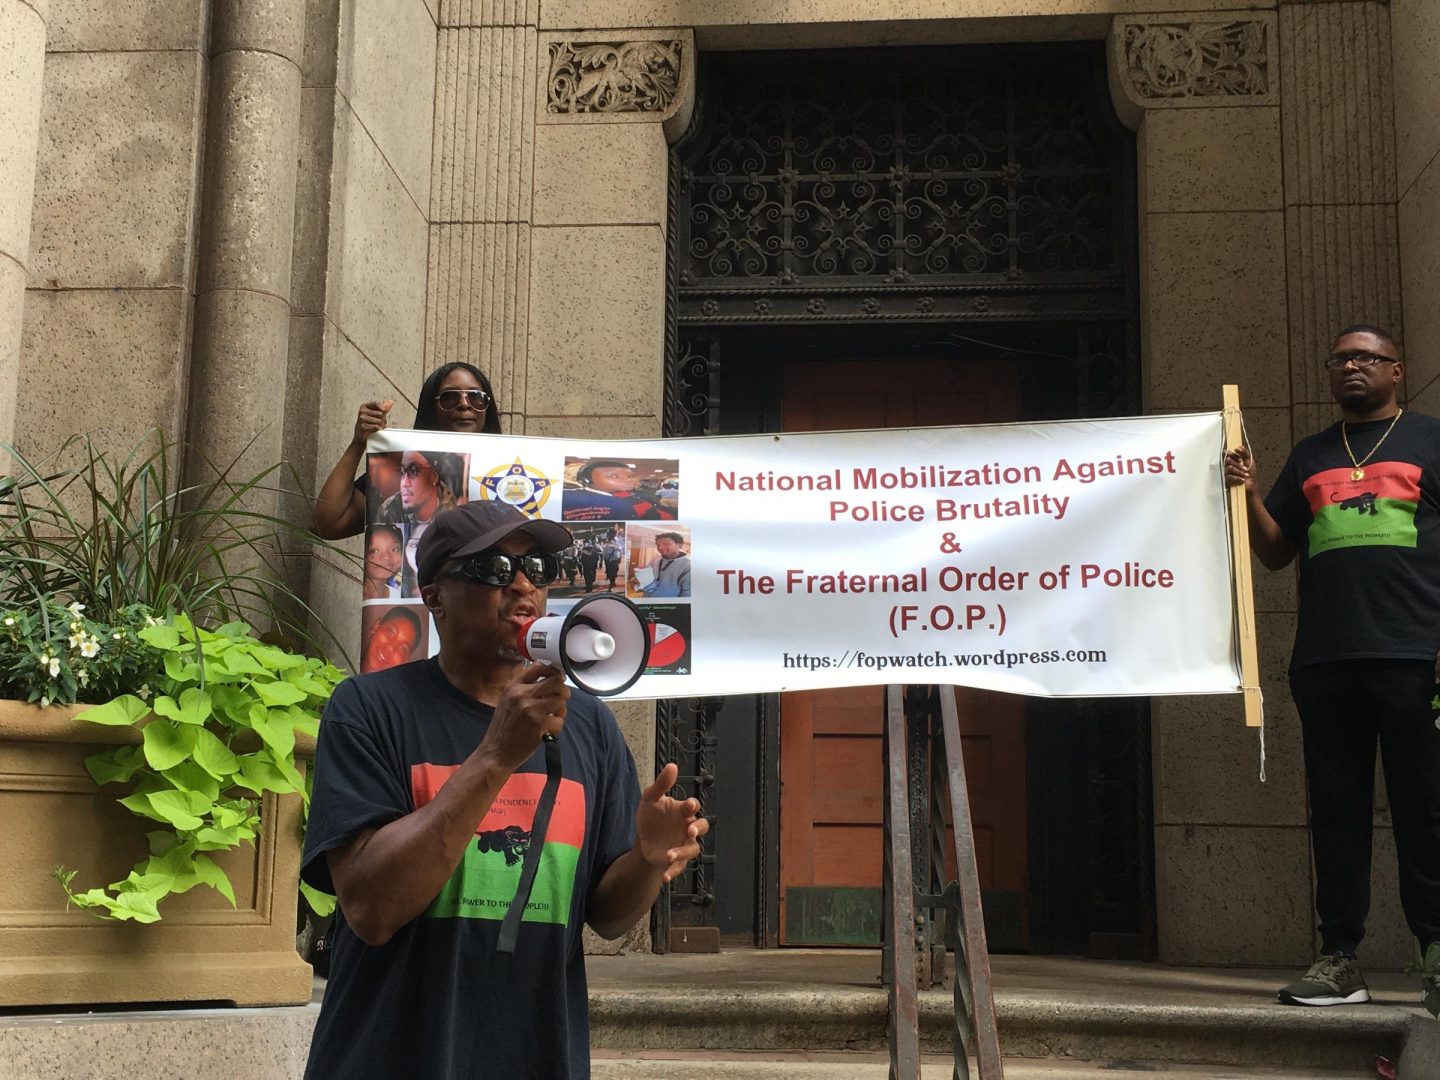 Khalid Raheem, who organizes the Committee for a Civilian Police Review Board of Allegheny County, spoke in support of the proposed board before the Allegheny County Council meeting July 10, 2018.